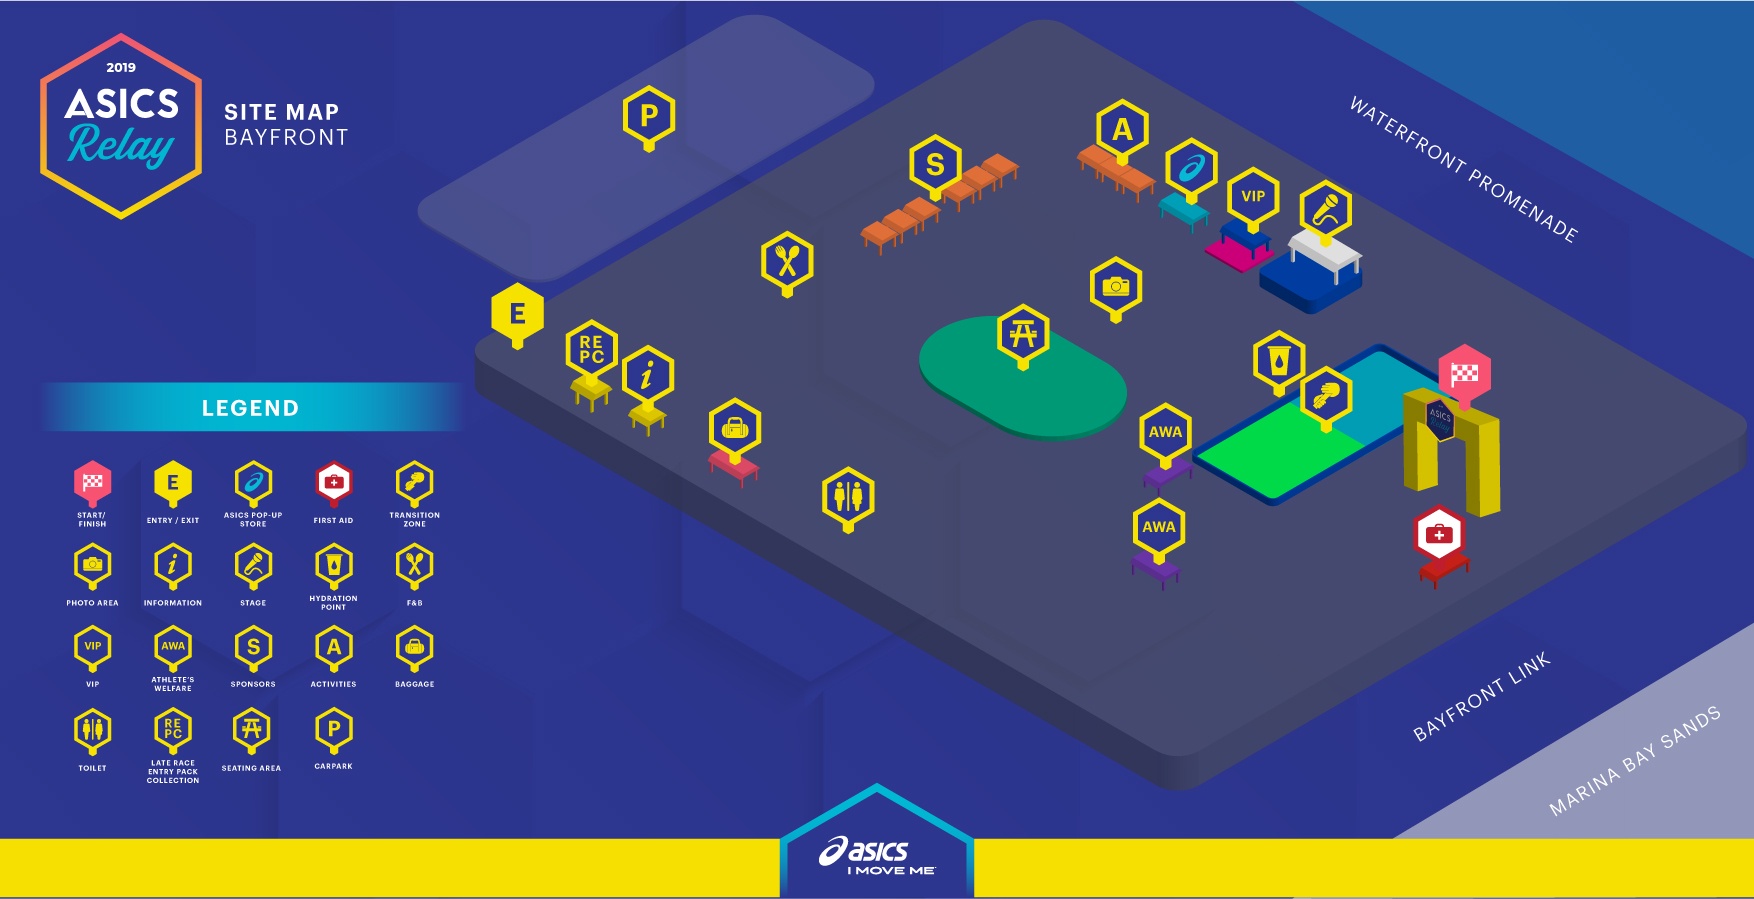 ASICS Relay 2019_SITE MAP_17 oct_Site Map